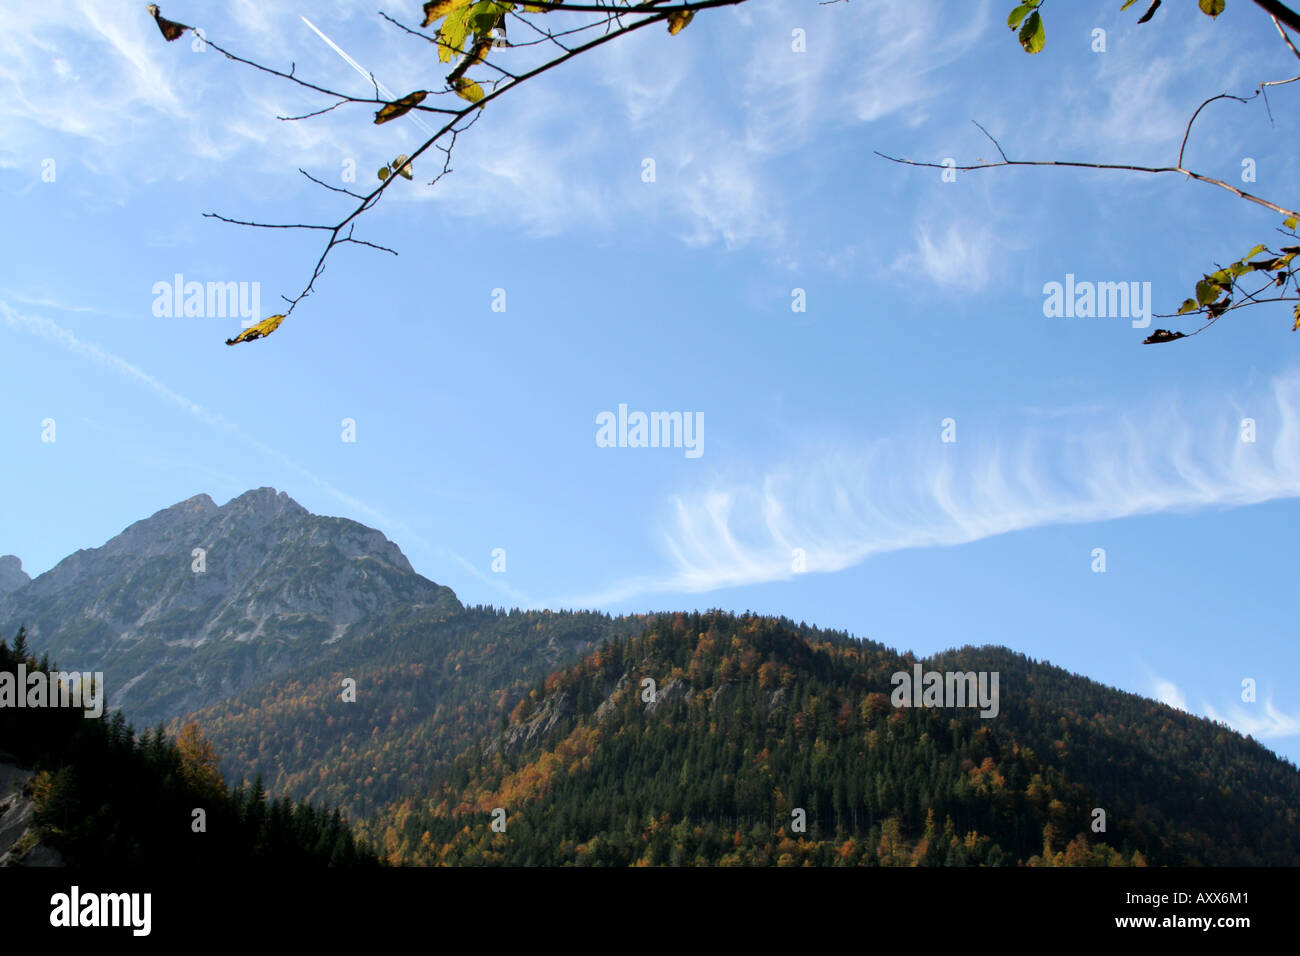 cloud formation on a blue sky in autumn scenery Hinterriss Eng Karwendel Tyrol Austria Stock Photo